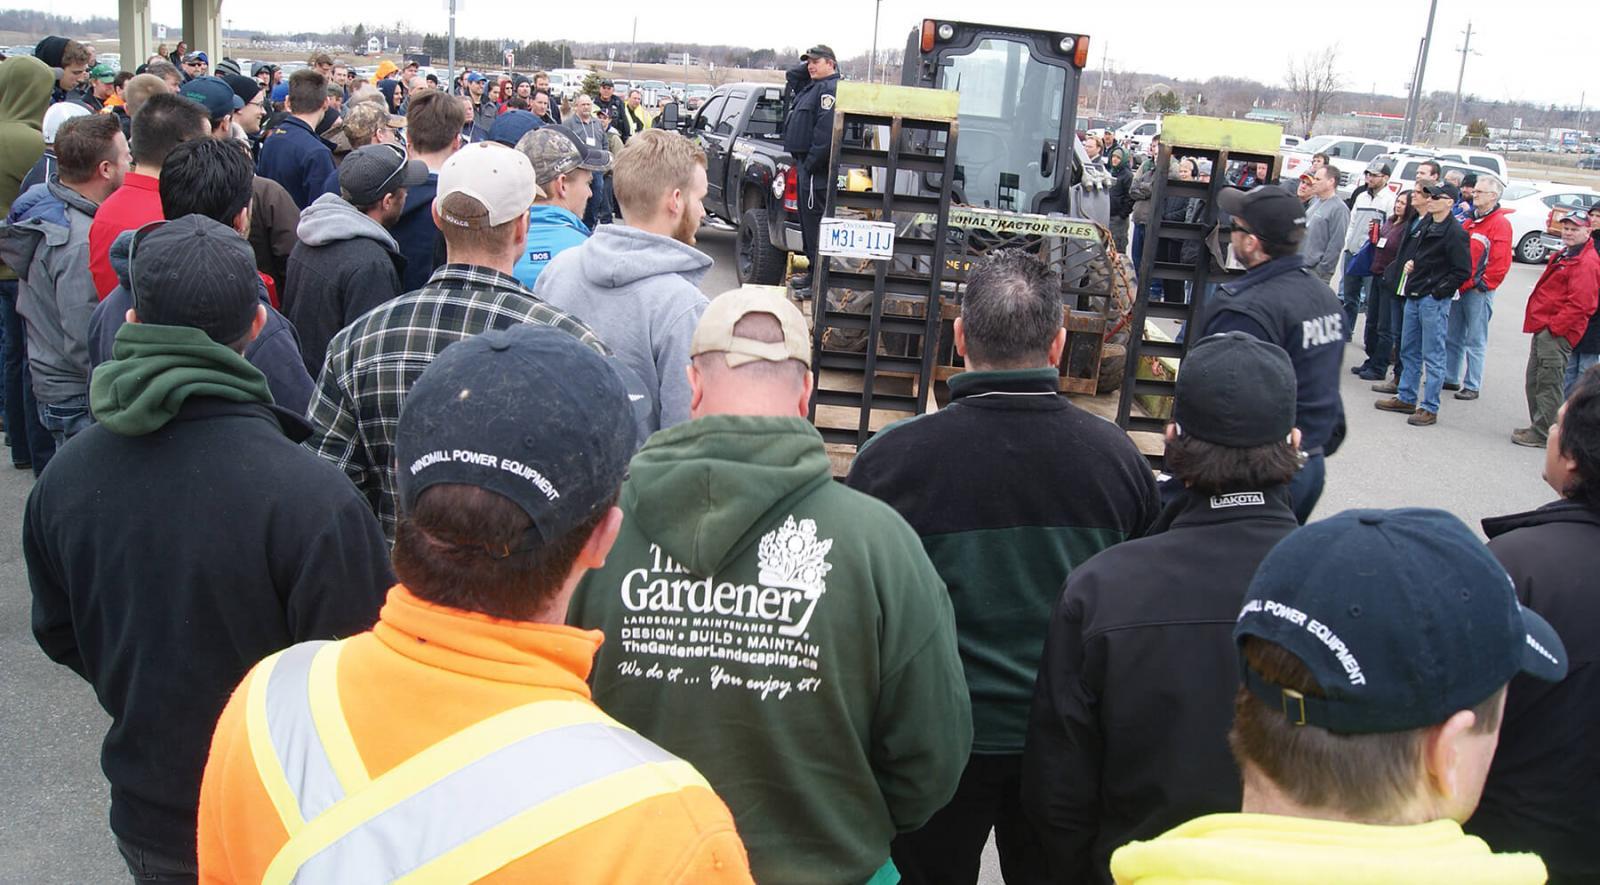 A hands-on truck inspection brought everyone outside during the Gear Up for Spring Event.